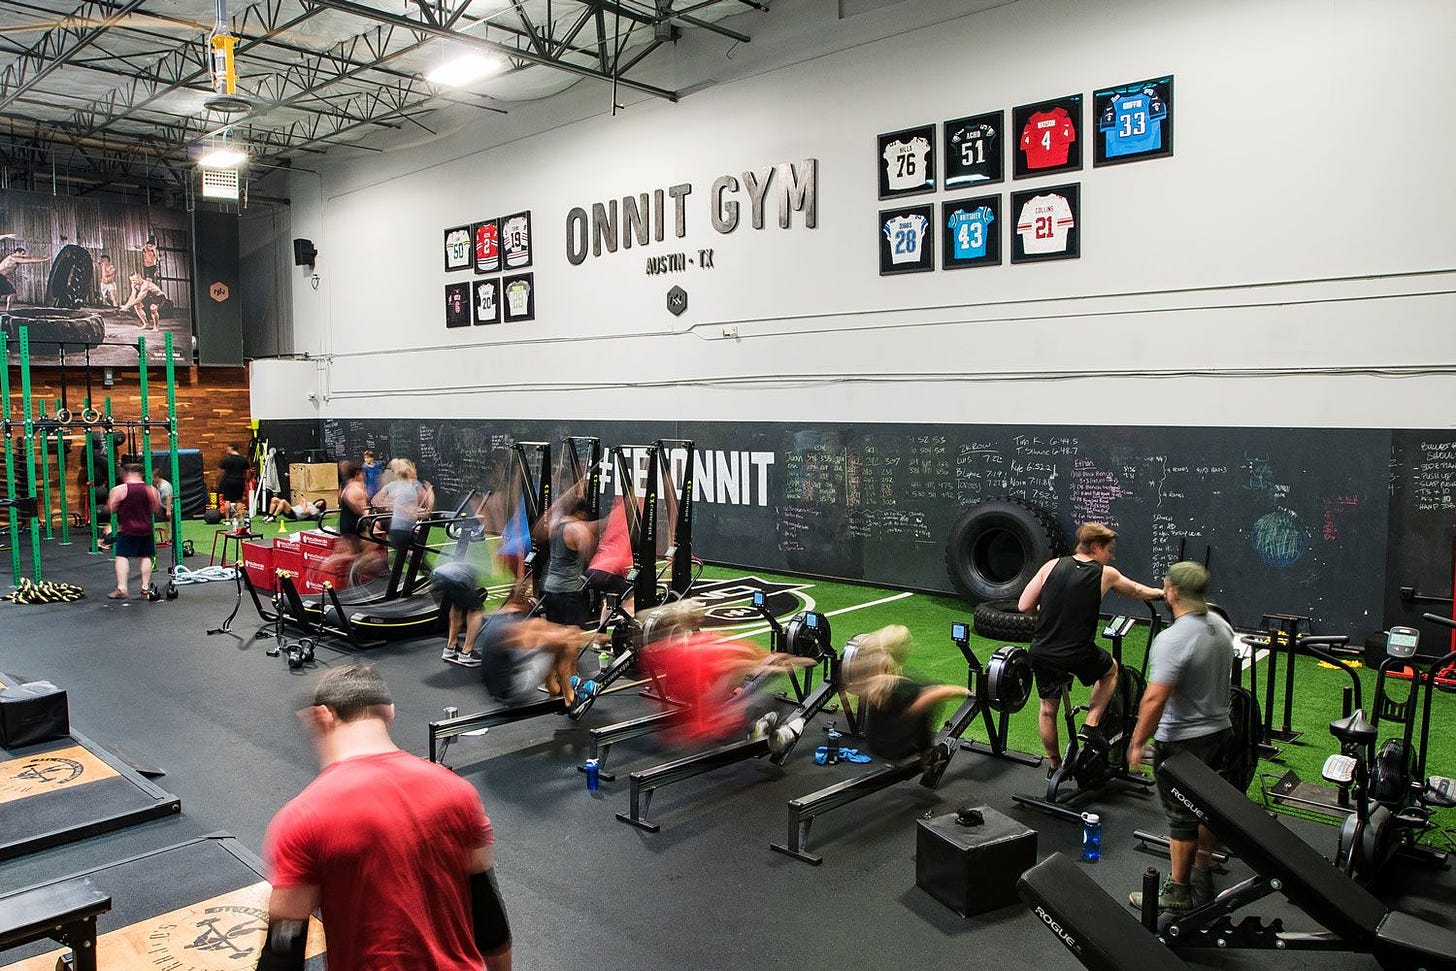 Onnit Academy Gym Uses Unconventional Workouts for Results - rta.com.co